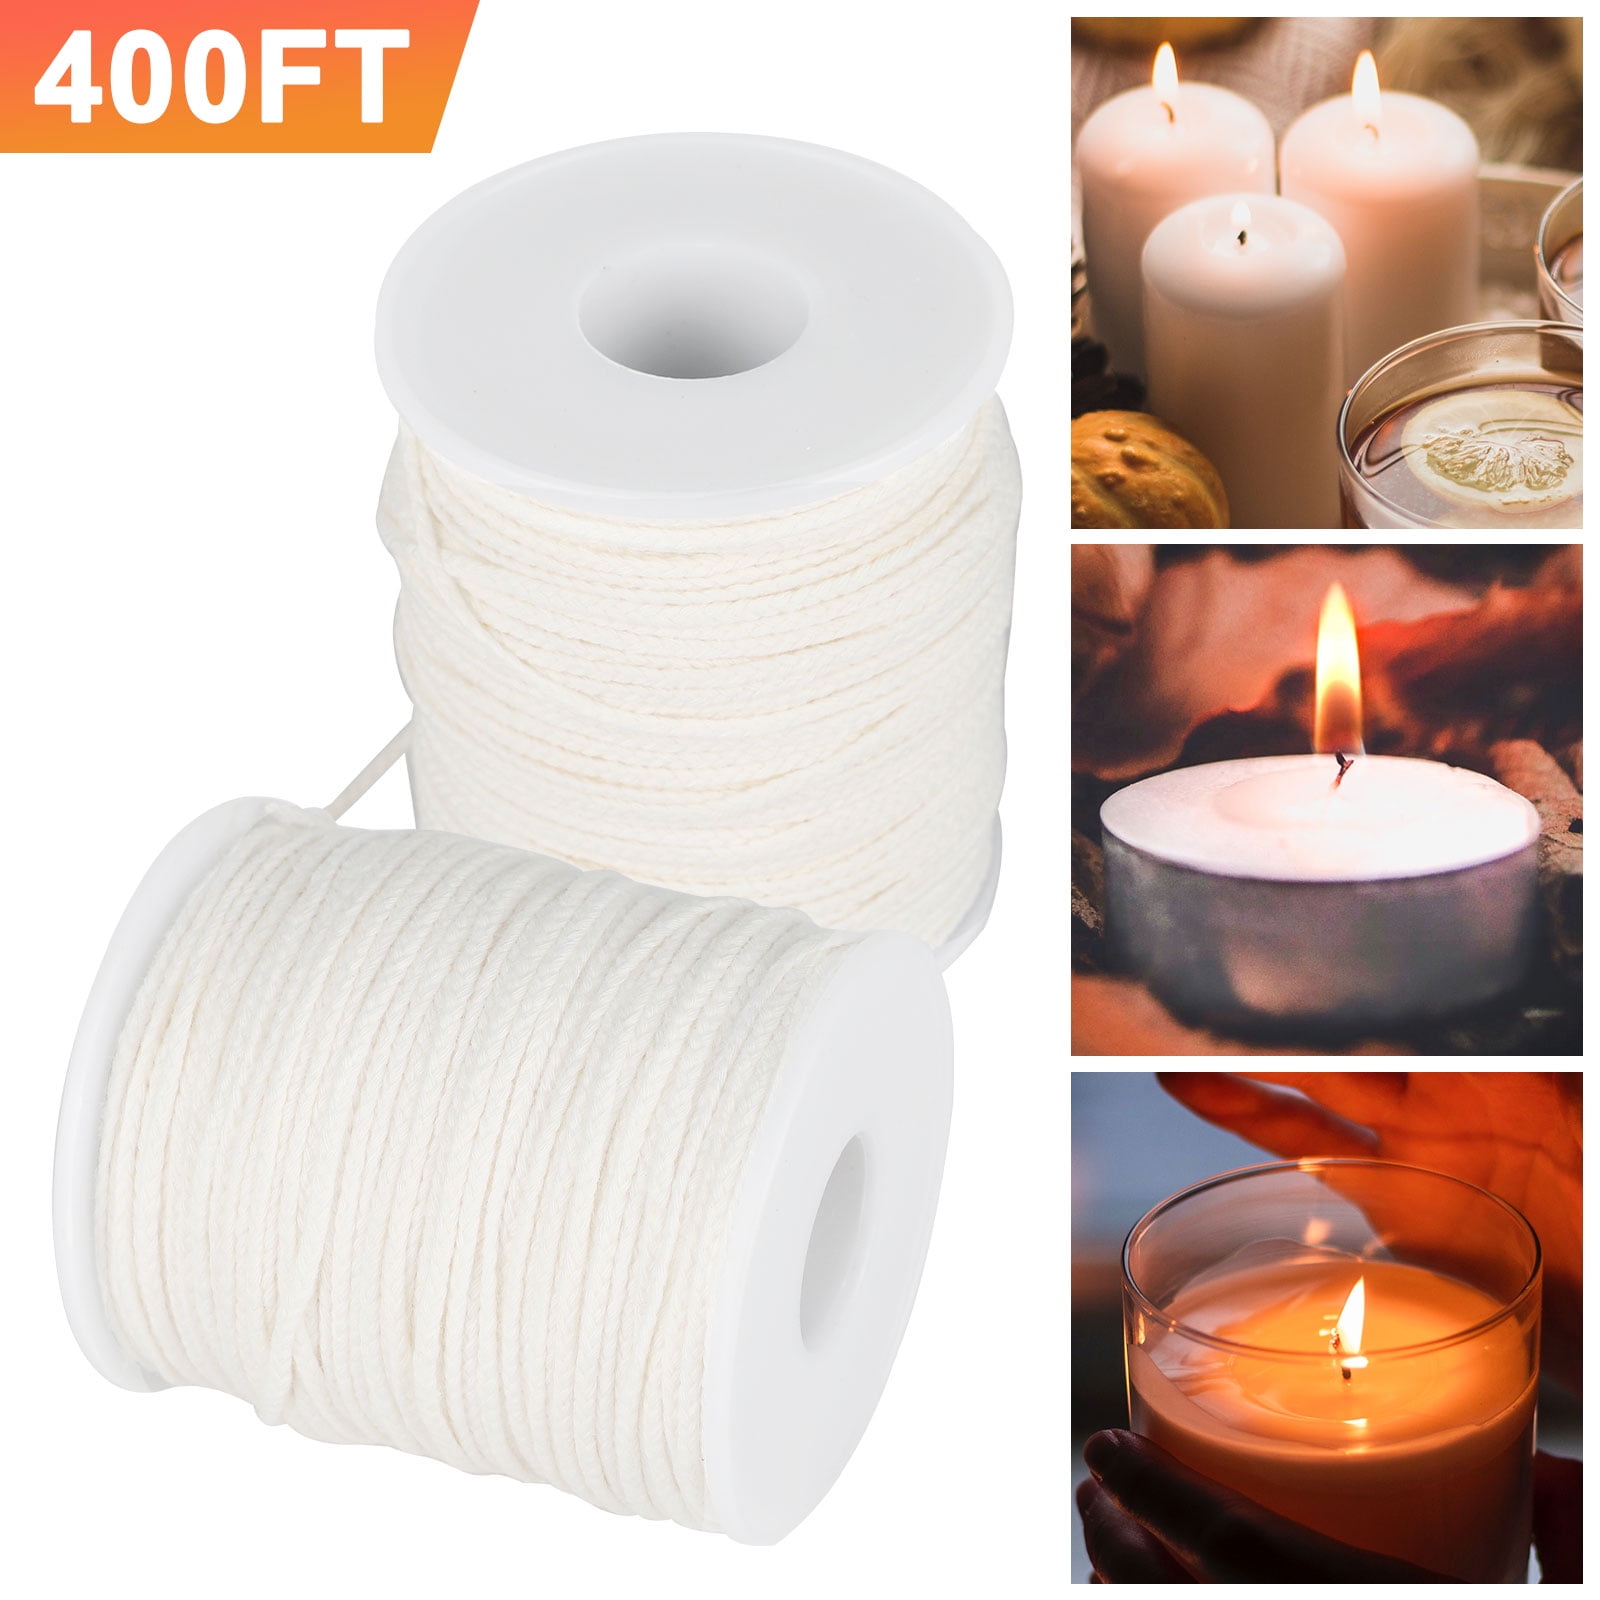 Laileya 50pcs Natural Candle Wick Core With Metal Sustainers Low Smoke For Candle Making DIY